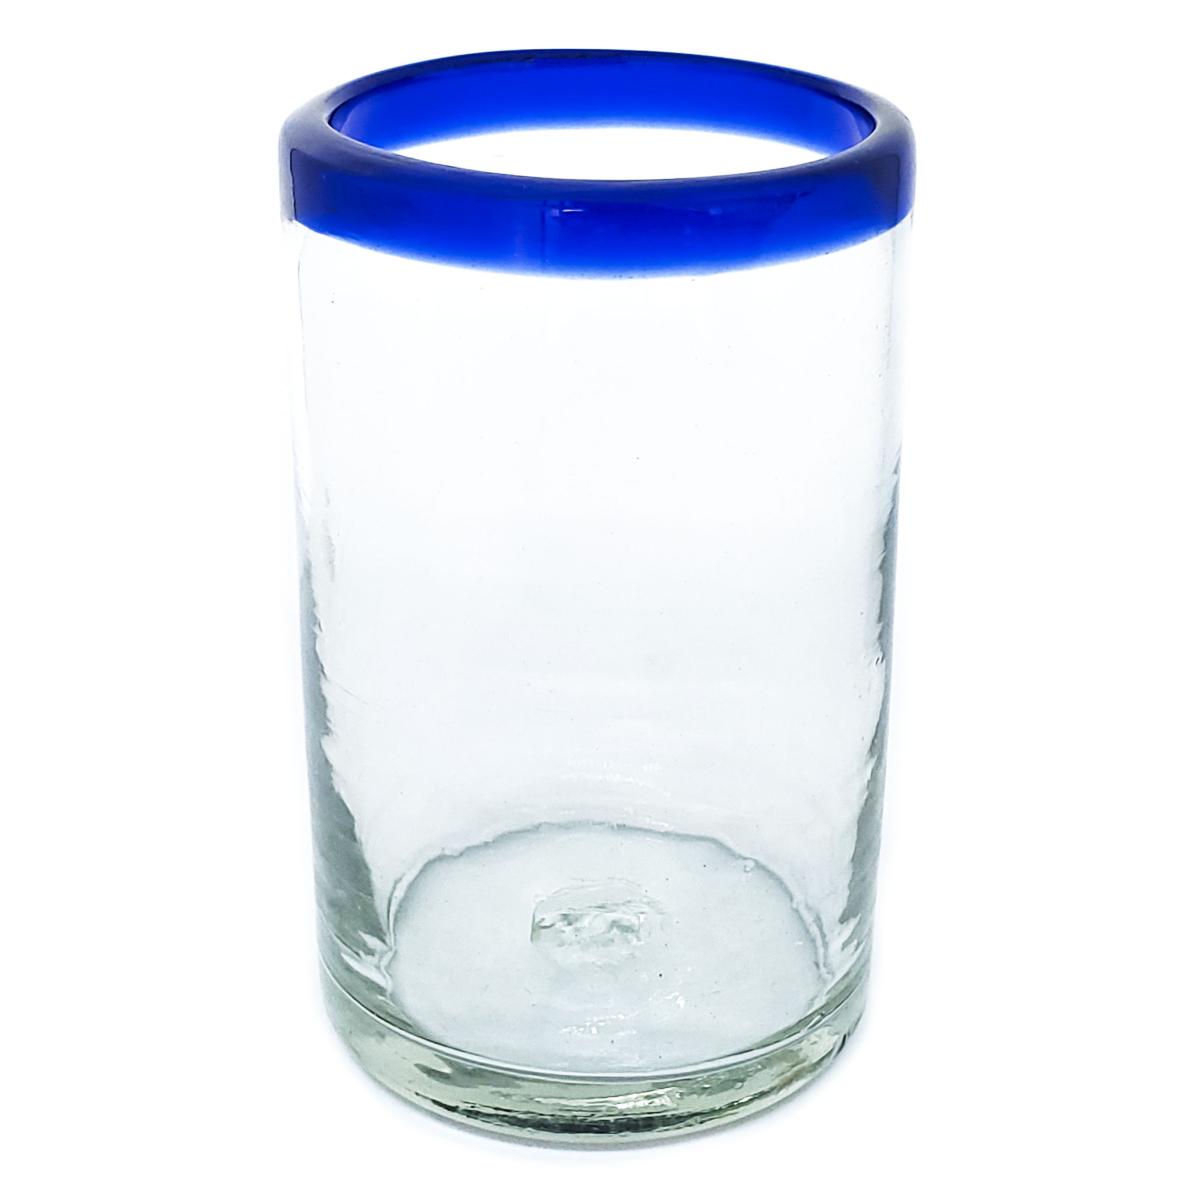 Wholesale MEXICAN GLASSWARE / Cobalt Blue Rim 14 oz Drinking Glasses  / These handcrafted glasses deliver a classic touch to your favorite drink.